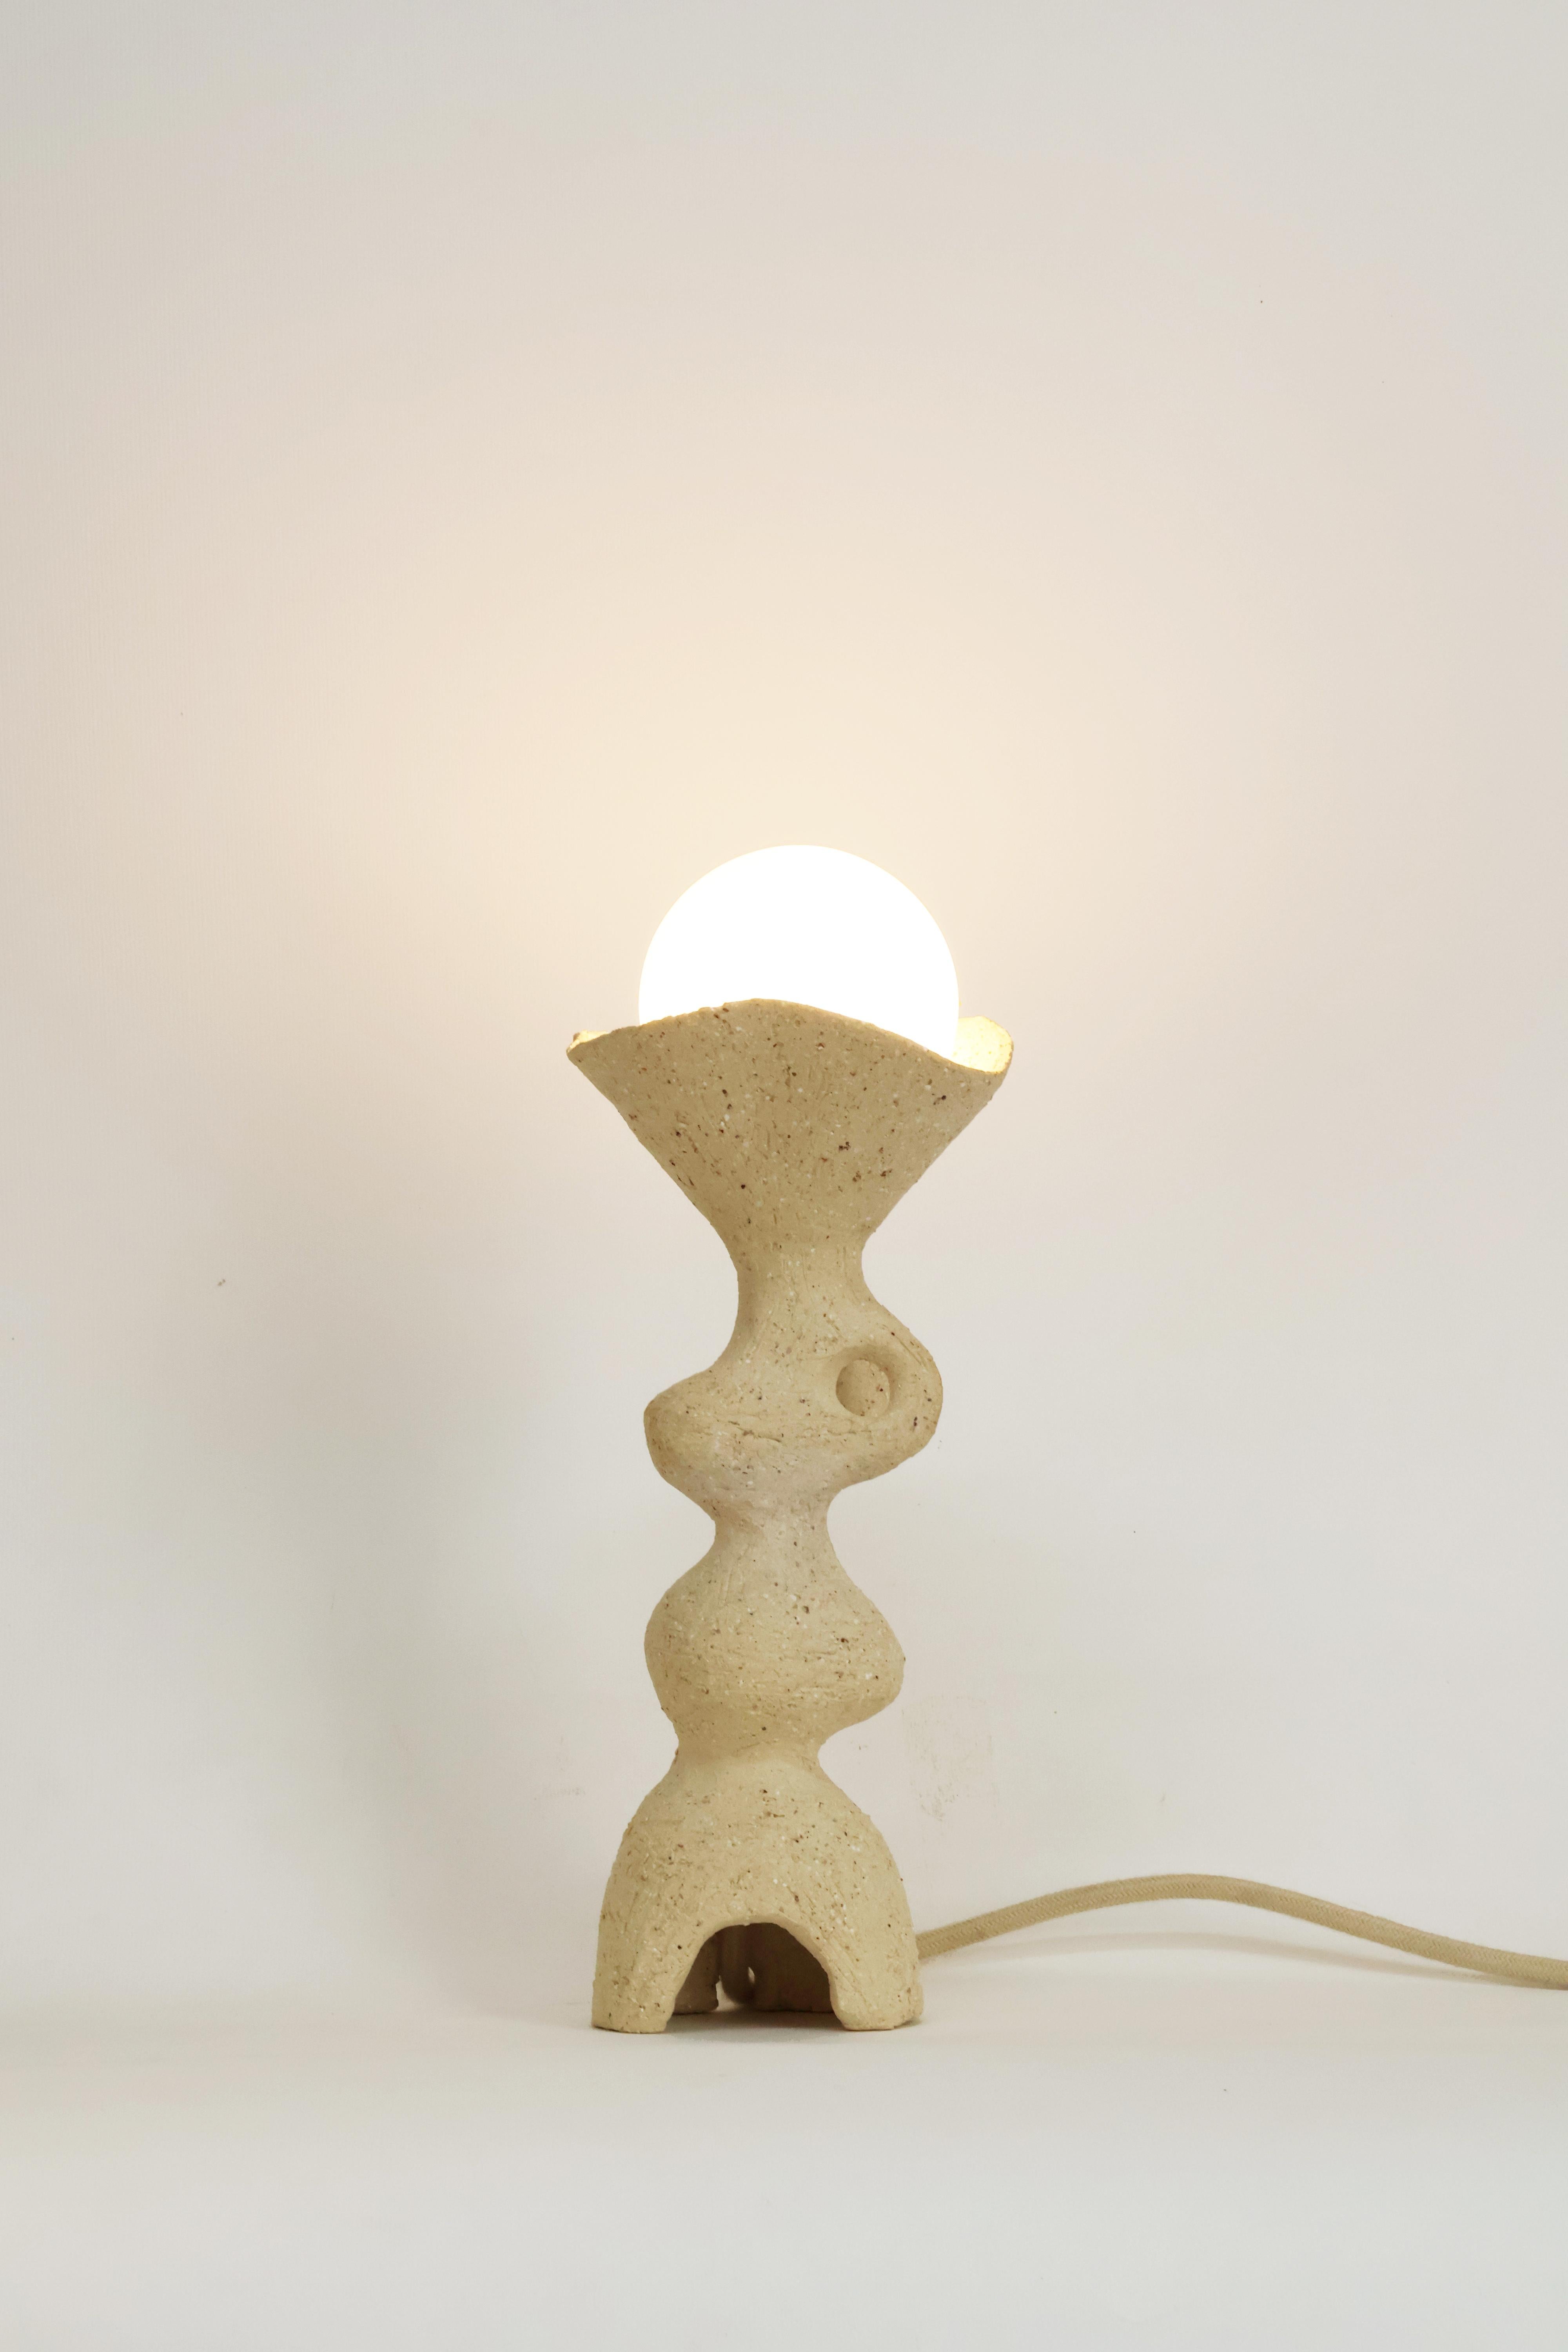 Totem II Table Lamp by Camila Apaez
Unique
Materials: Stoneware, Clay
Dimensions: ⌀ 10 x H 31 cm

Ila Ceramica emerged from a process of inner inquiry where ceramics became a space for presence, silence, touch and patience. Camila discovered the